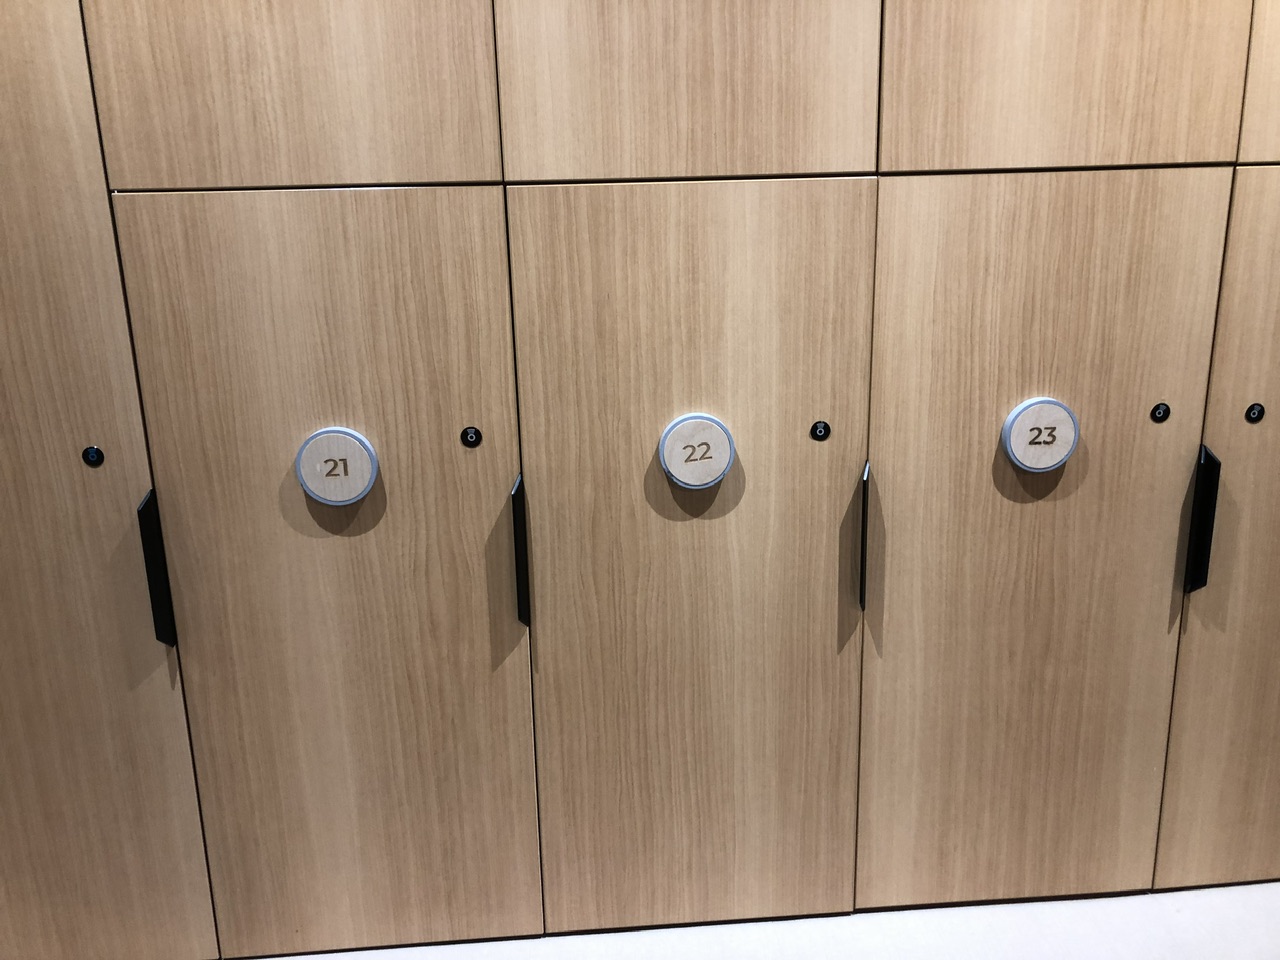 Light-wood coloured lockers at Ōpuke Thermal Pools and Day Spa. Numbers 21-23 are pictured and they have contactless key entry.